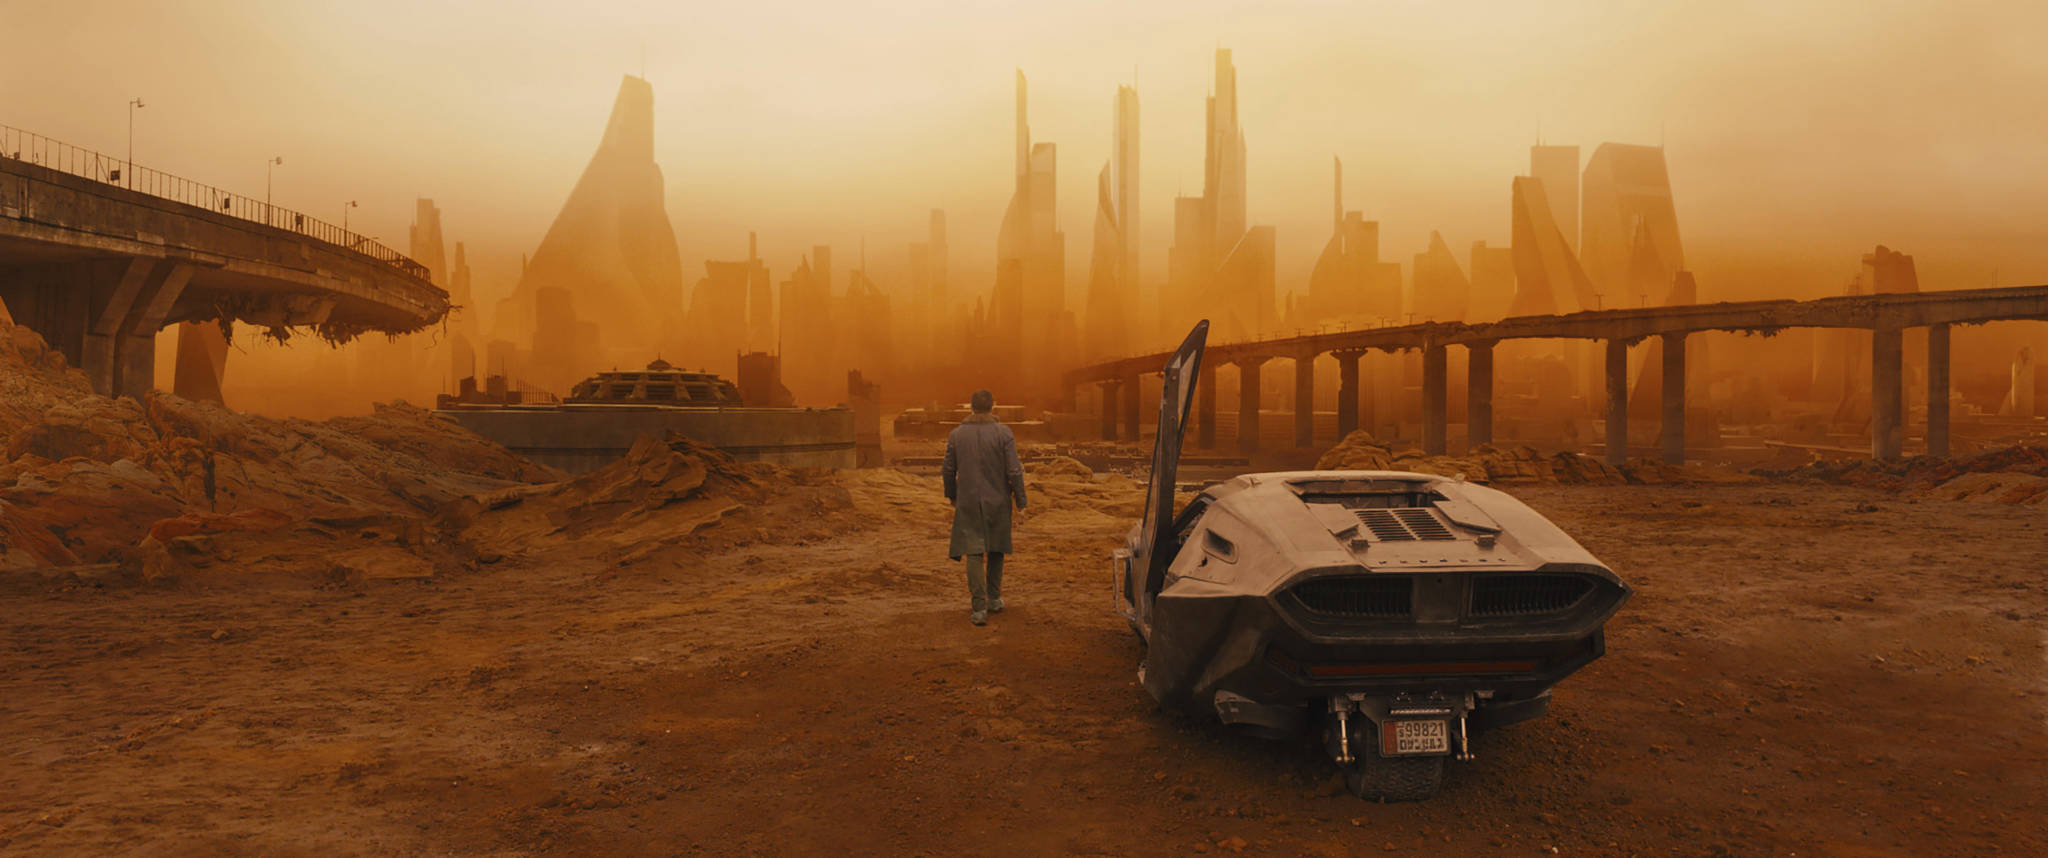 This image released by Warner Bros. Pictures shows a scene from “Blade Runner 2049.” (Warner Bros. Pictures via AP)